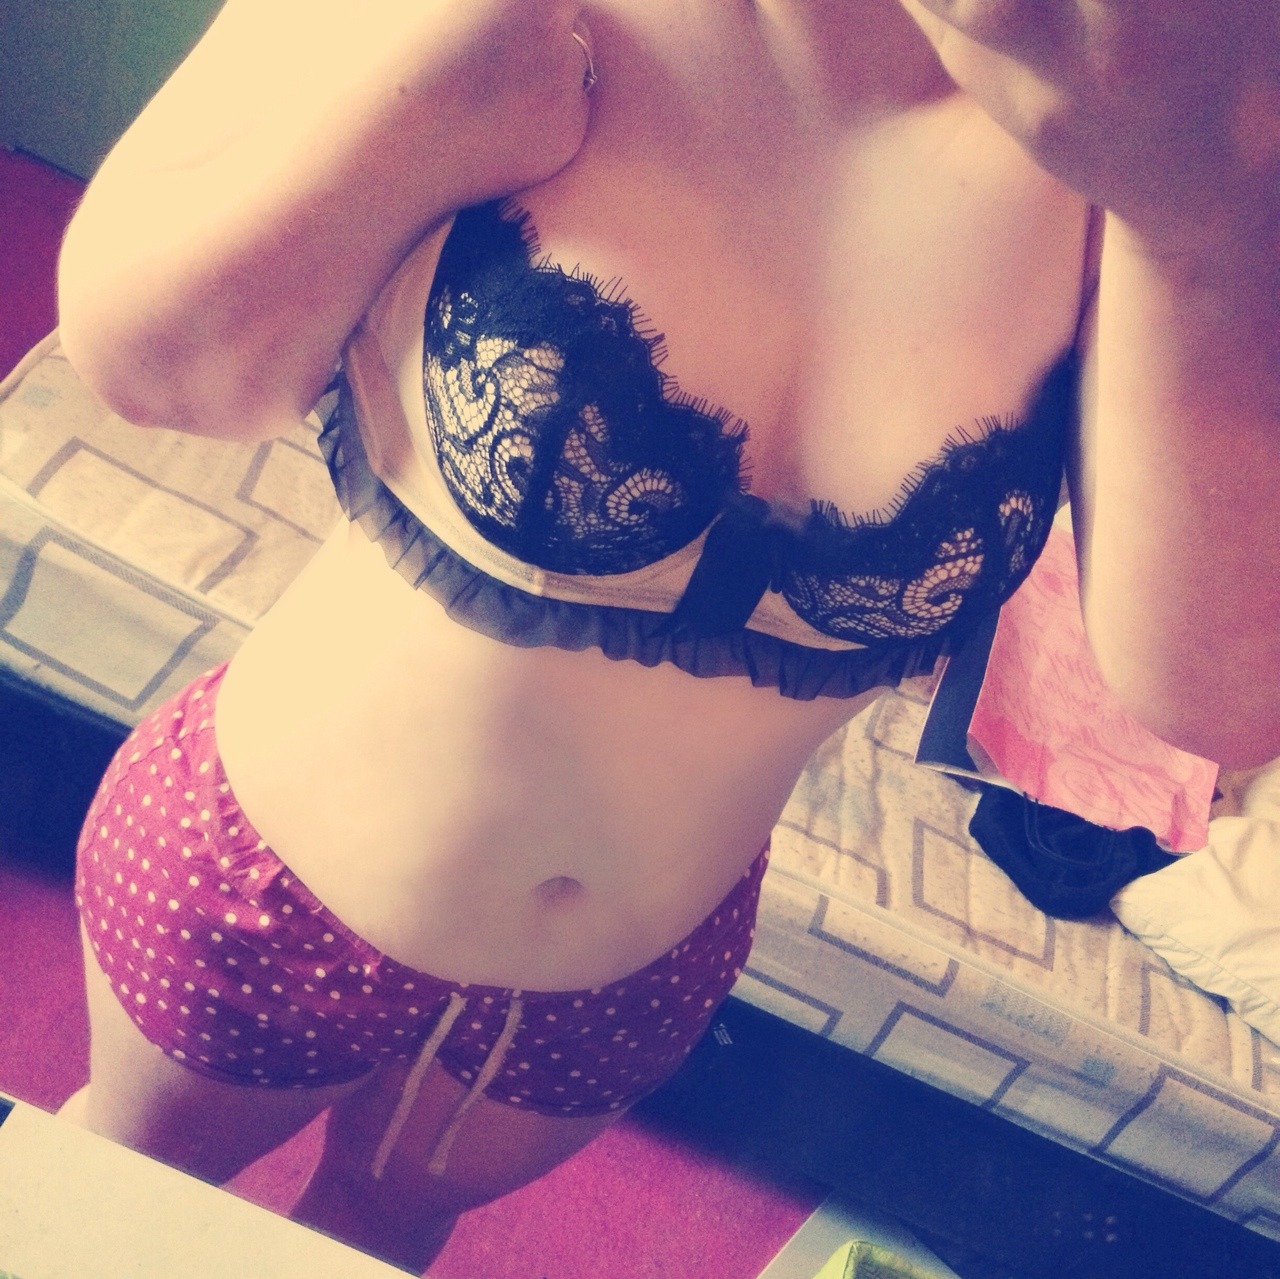 nintend-low-selfasteem:  Bought the prettiest bra from ann summers but currently